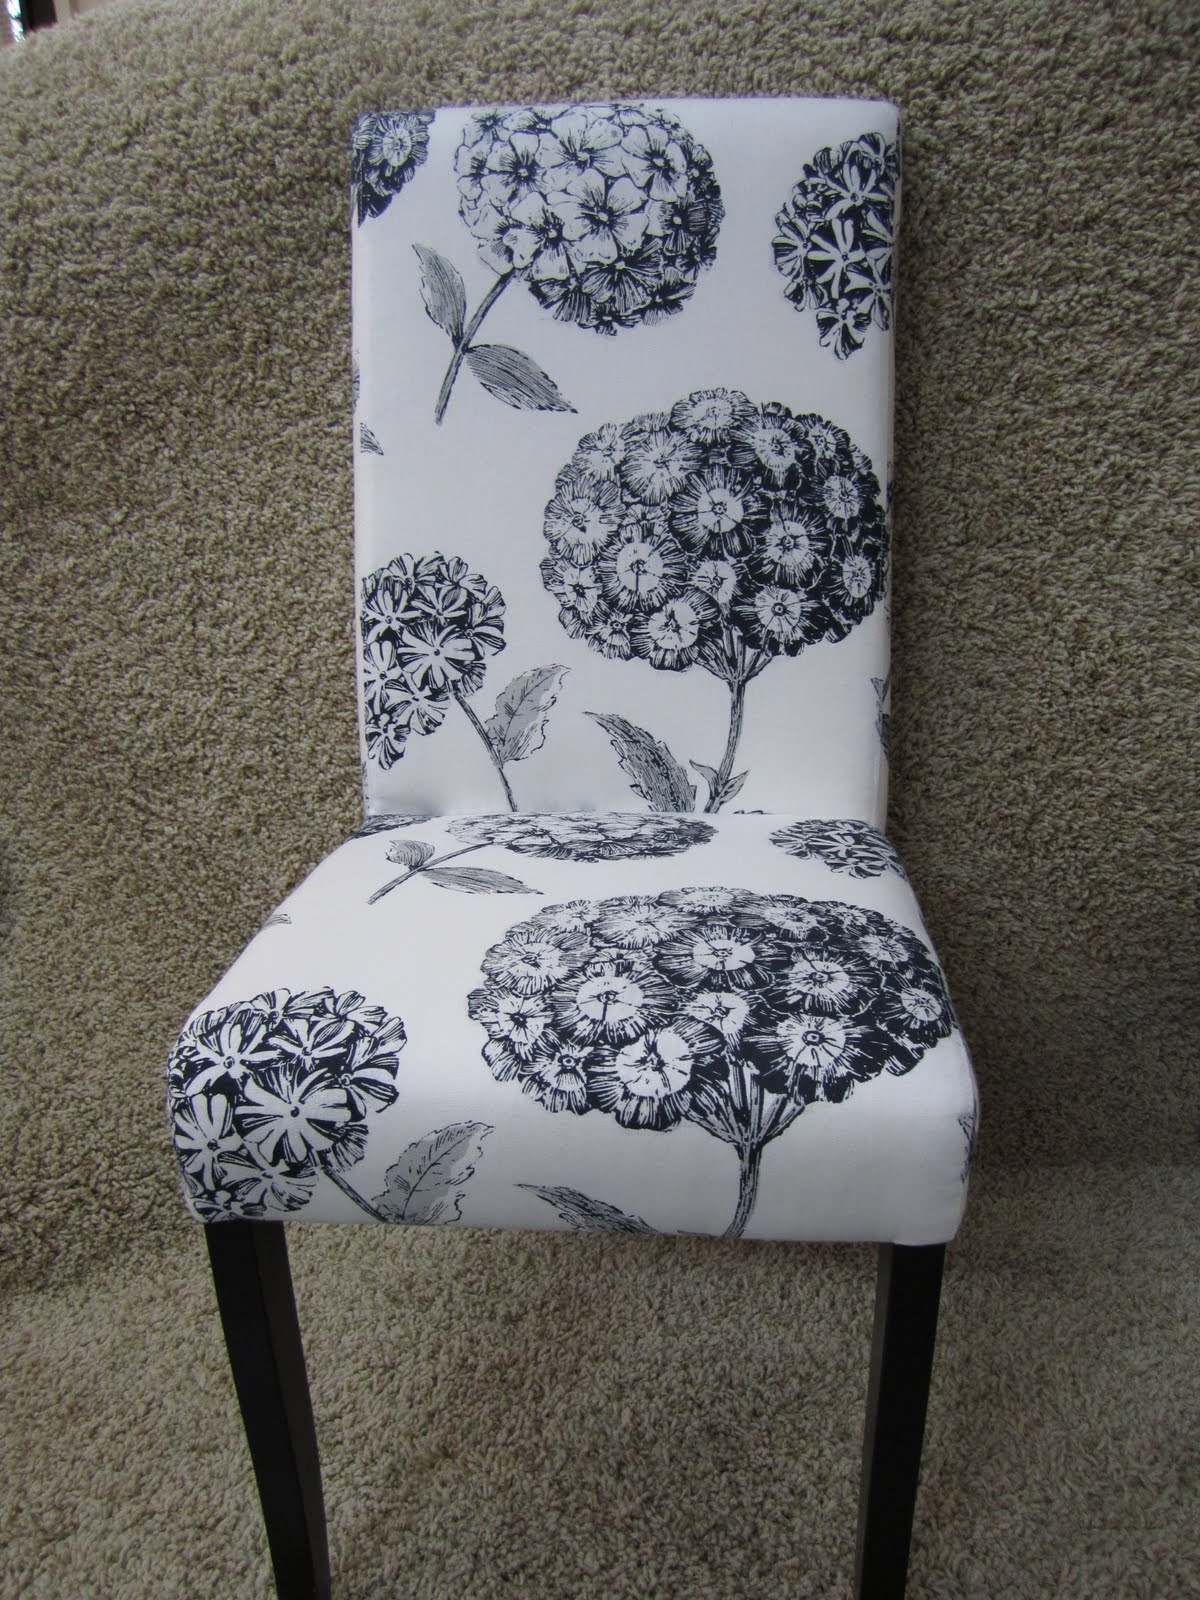 https://blog.kovifabrics.com/wp-content/uploads/2015/02/y-glamorous-martha-stewart-how-to-reupholster-a-dining-room-chair-how-much-fabric-is-needed-to-reupholster-a-dining-room-chair-how-much-to-reupholster-a-dining-room-chair-how-m.jpg